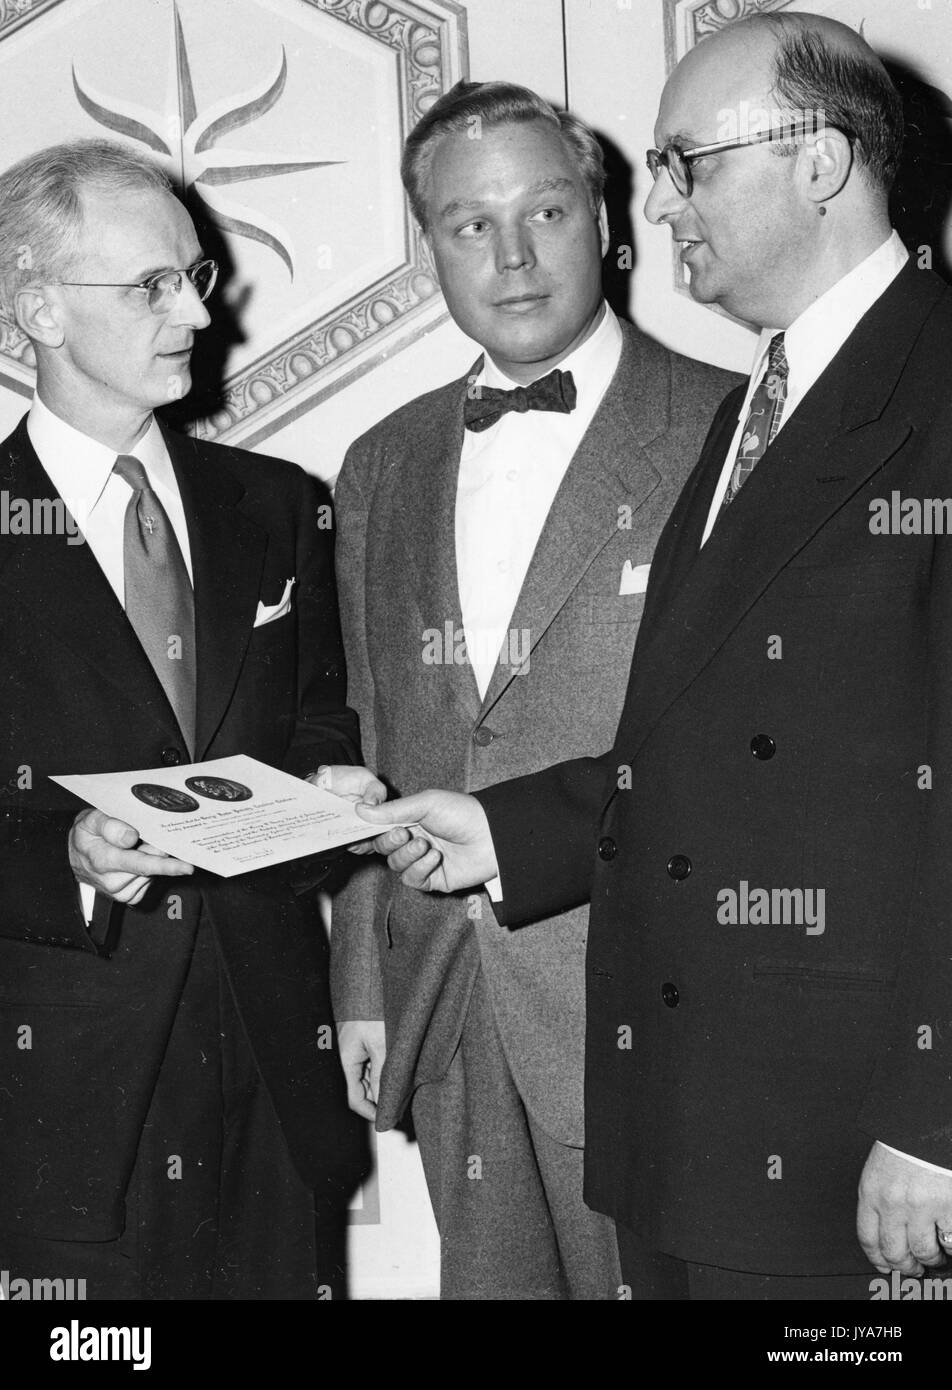 American television host Lynn Poole receiving an award for his work on the television show The Johns Hopkins Science Review, April 26, 1951. Stock Photo